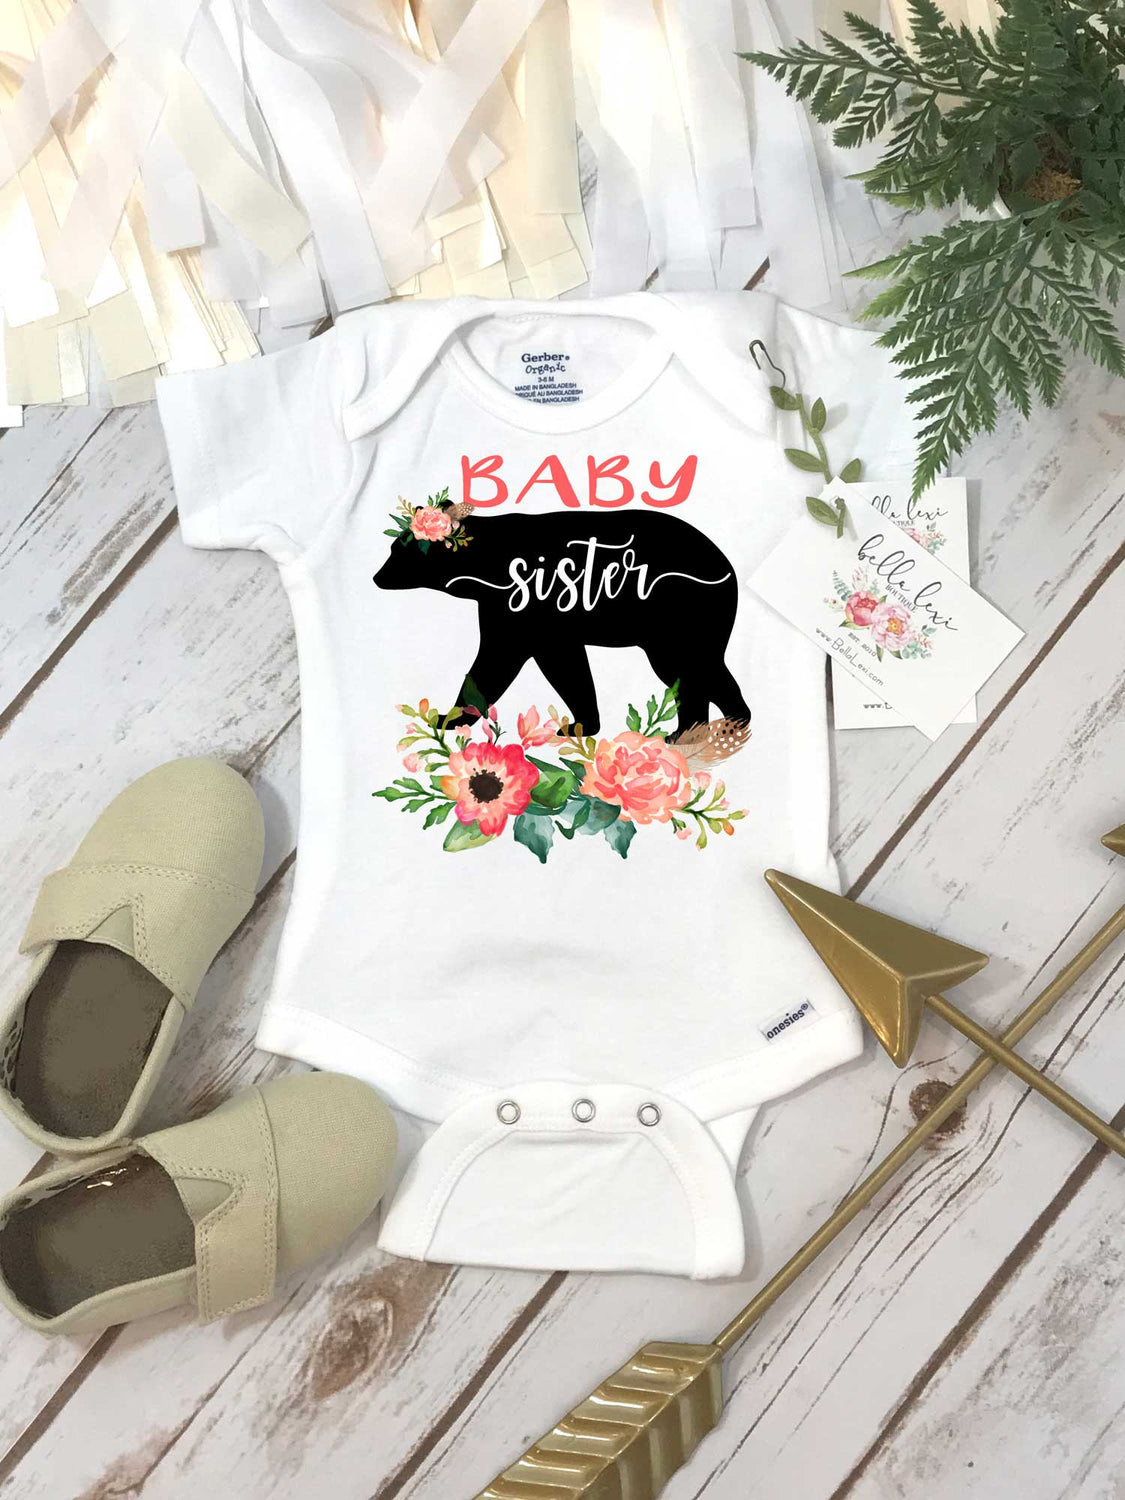 Baby Sister Onesie®, Floral Bear, Sisters Shirts, Baby Sister Shirt, Sister Shirt, Family tees, Baby Sister Reveal, Baby Sister Announcement